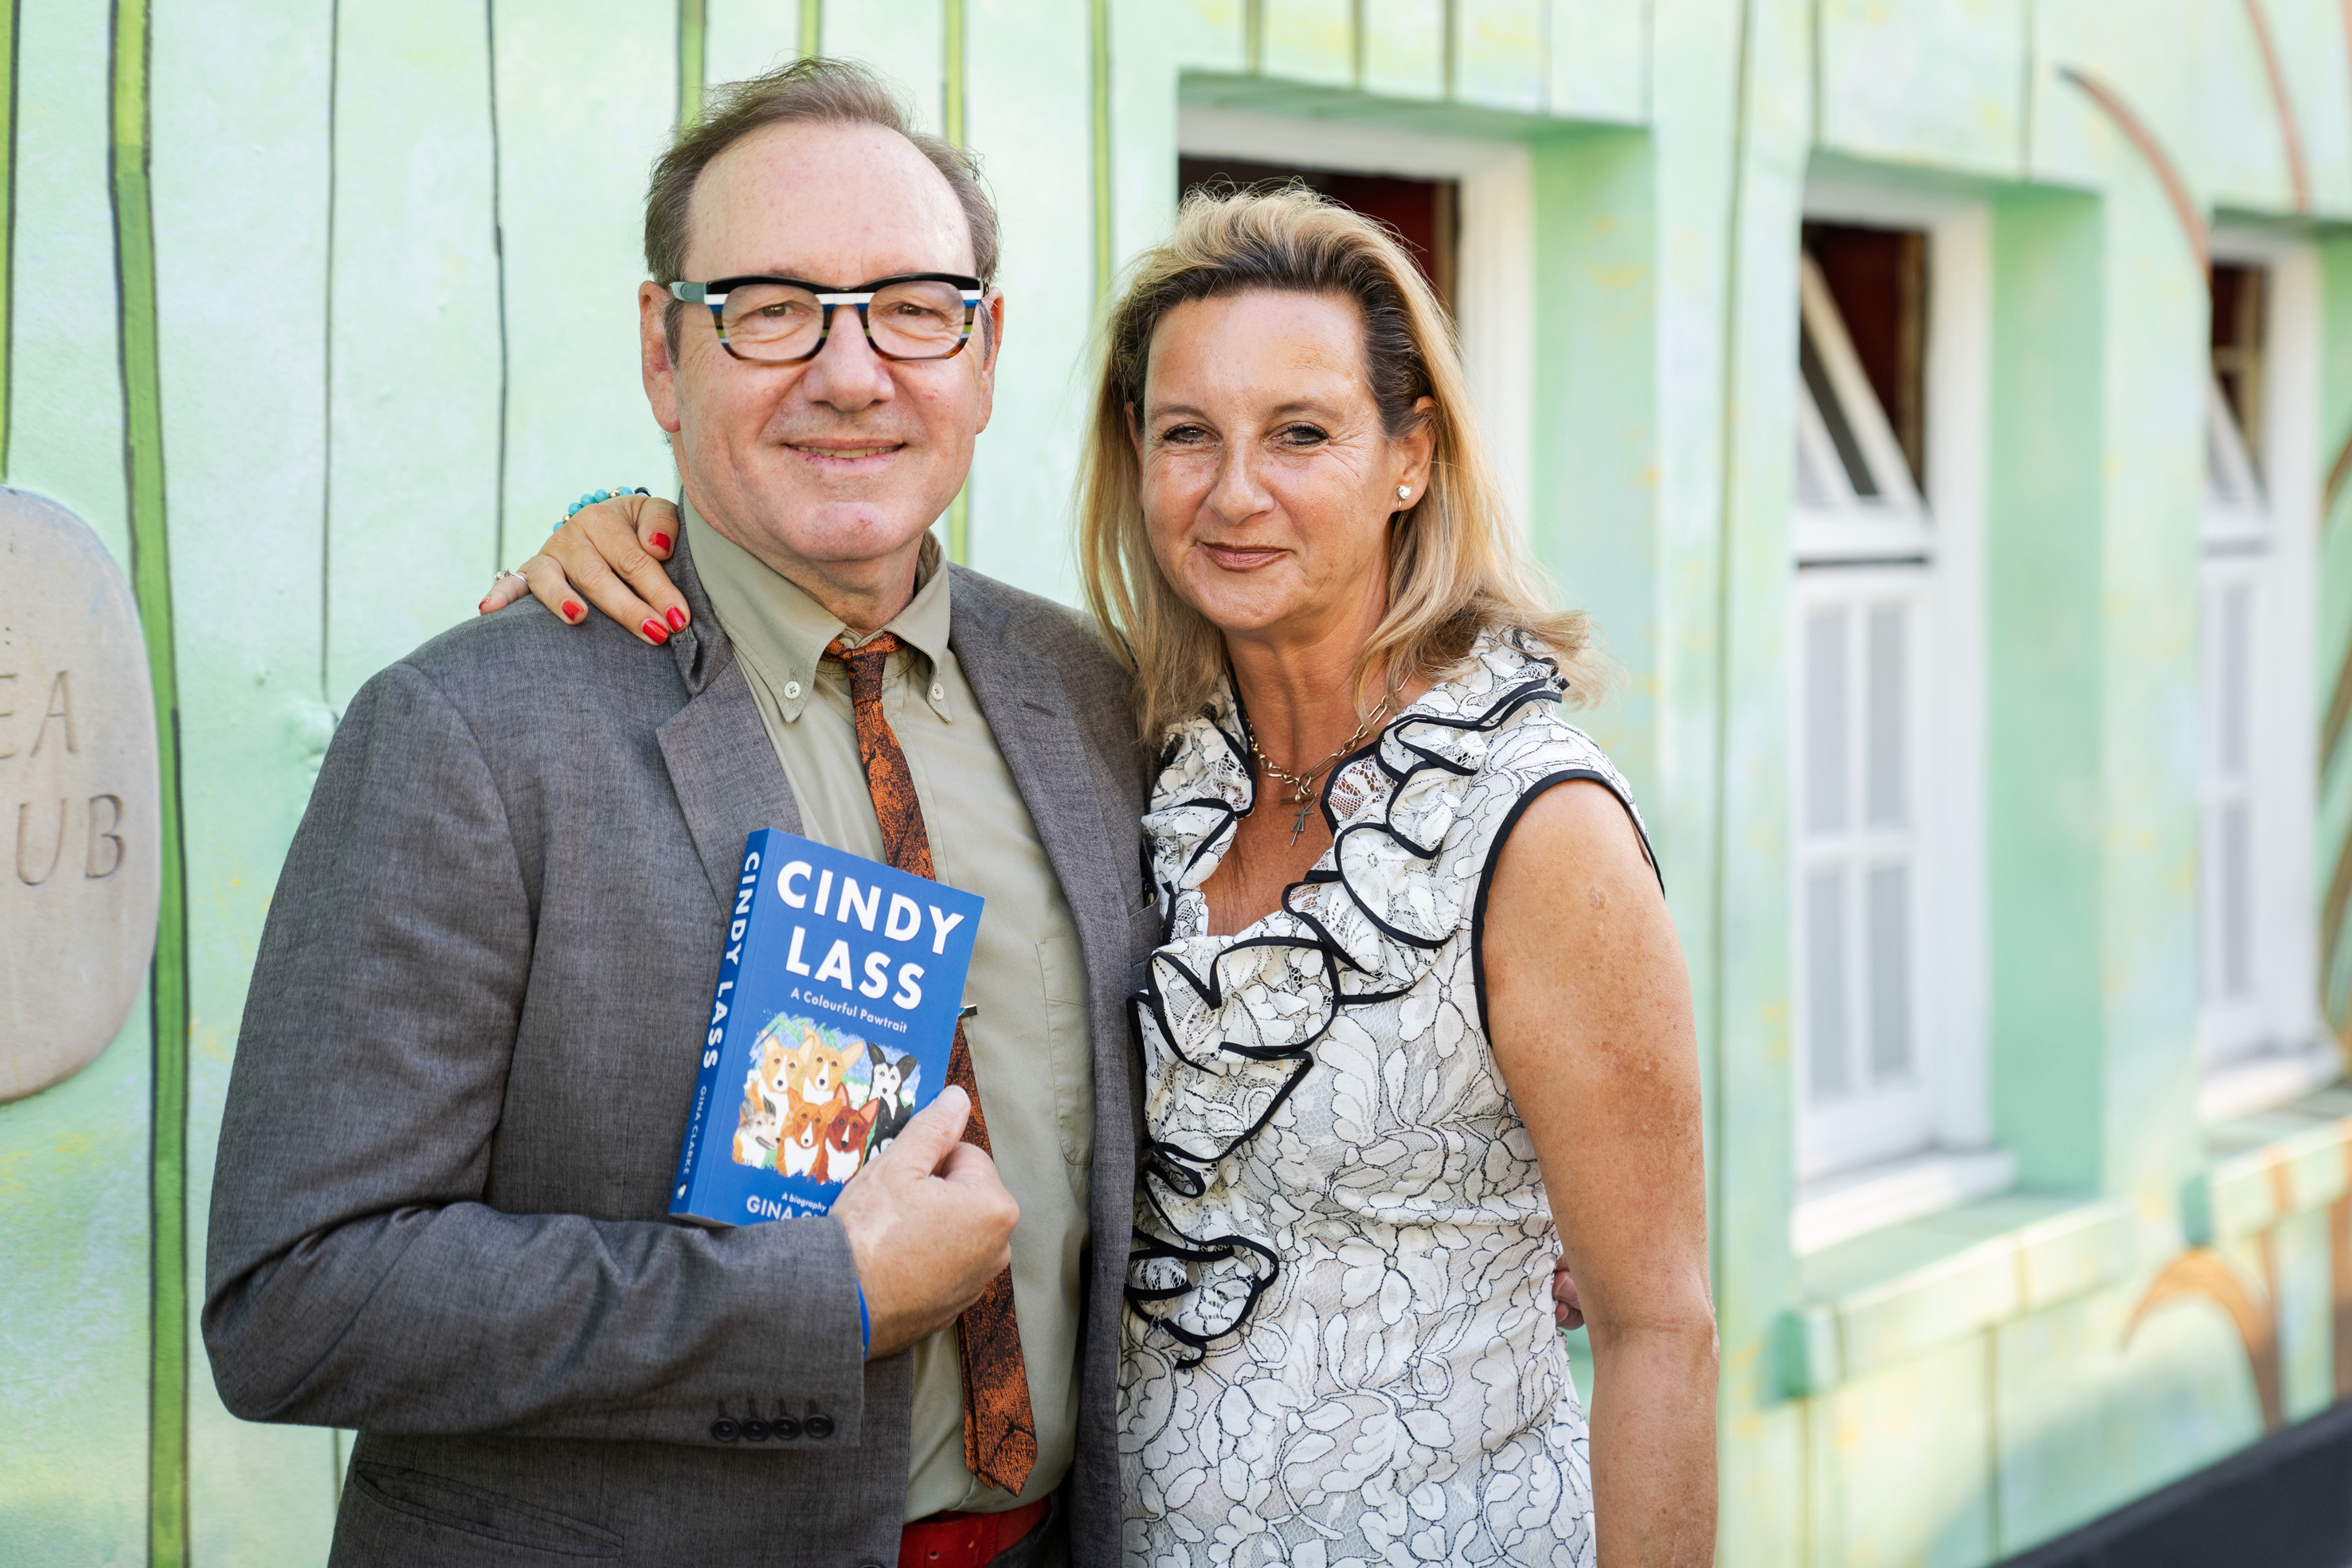 Kevin Spacey appears at book launch in London